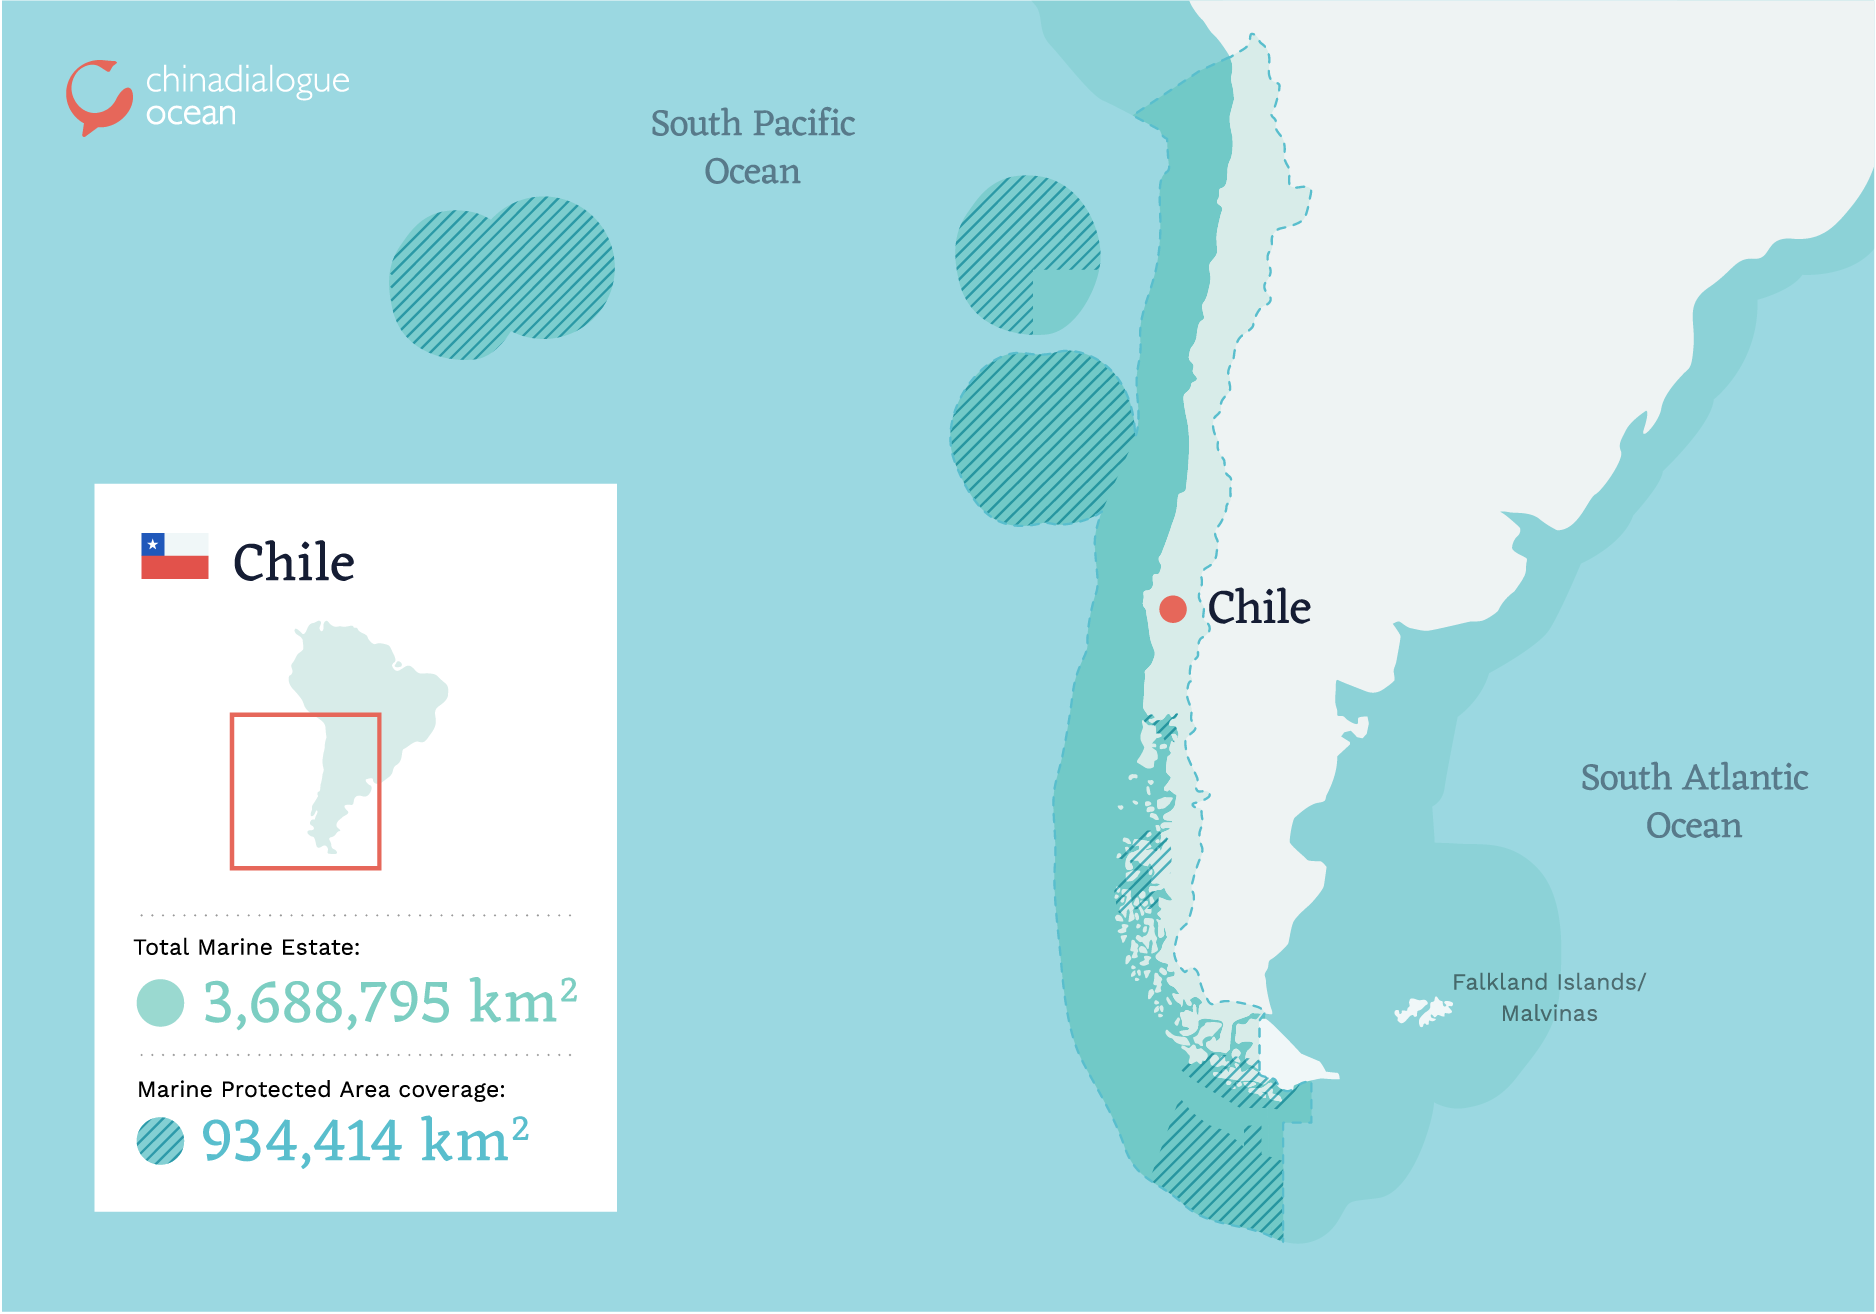 Chile's marine protected areas